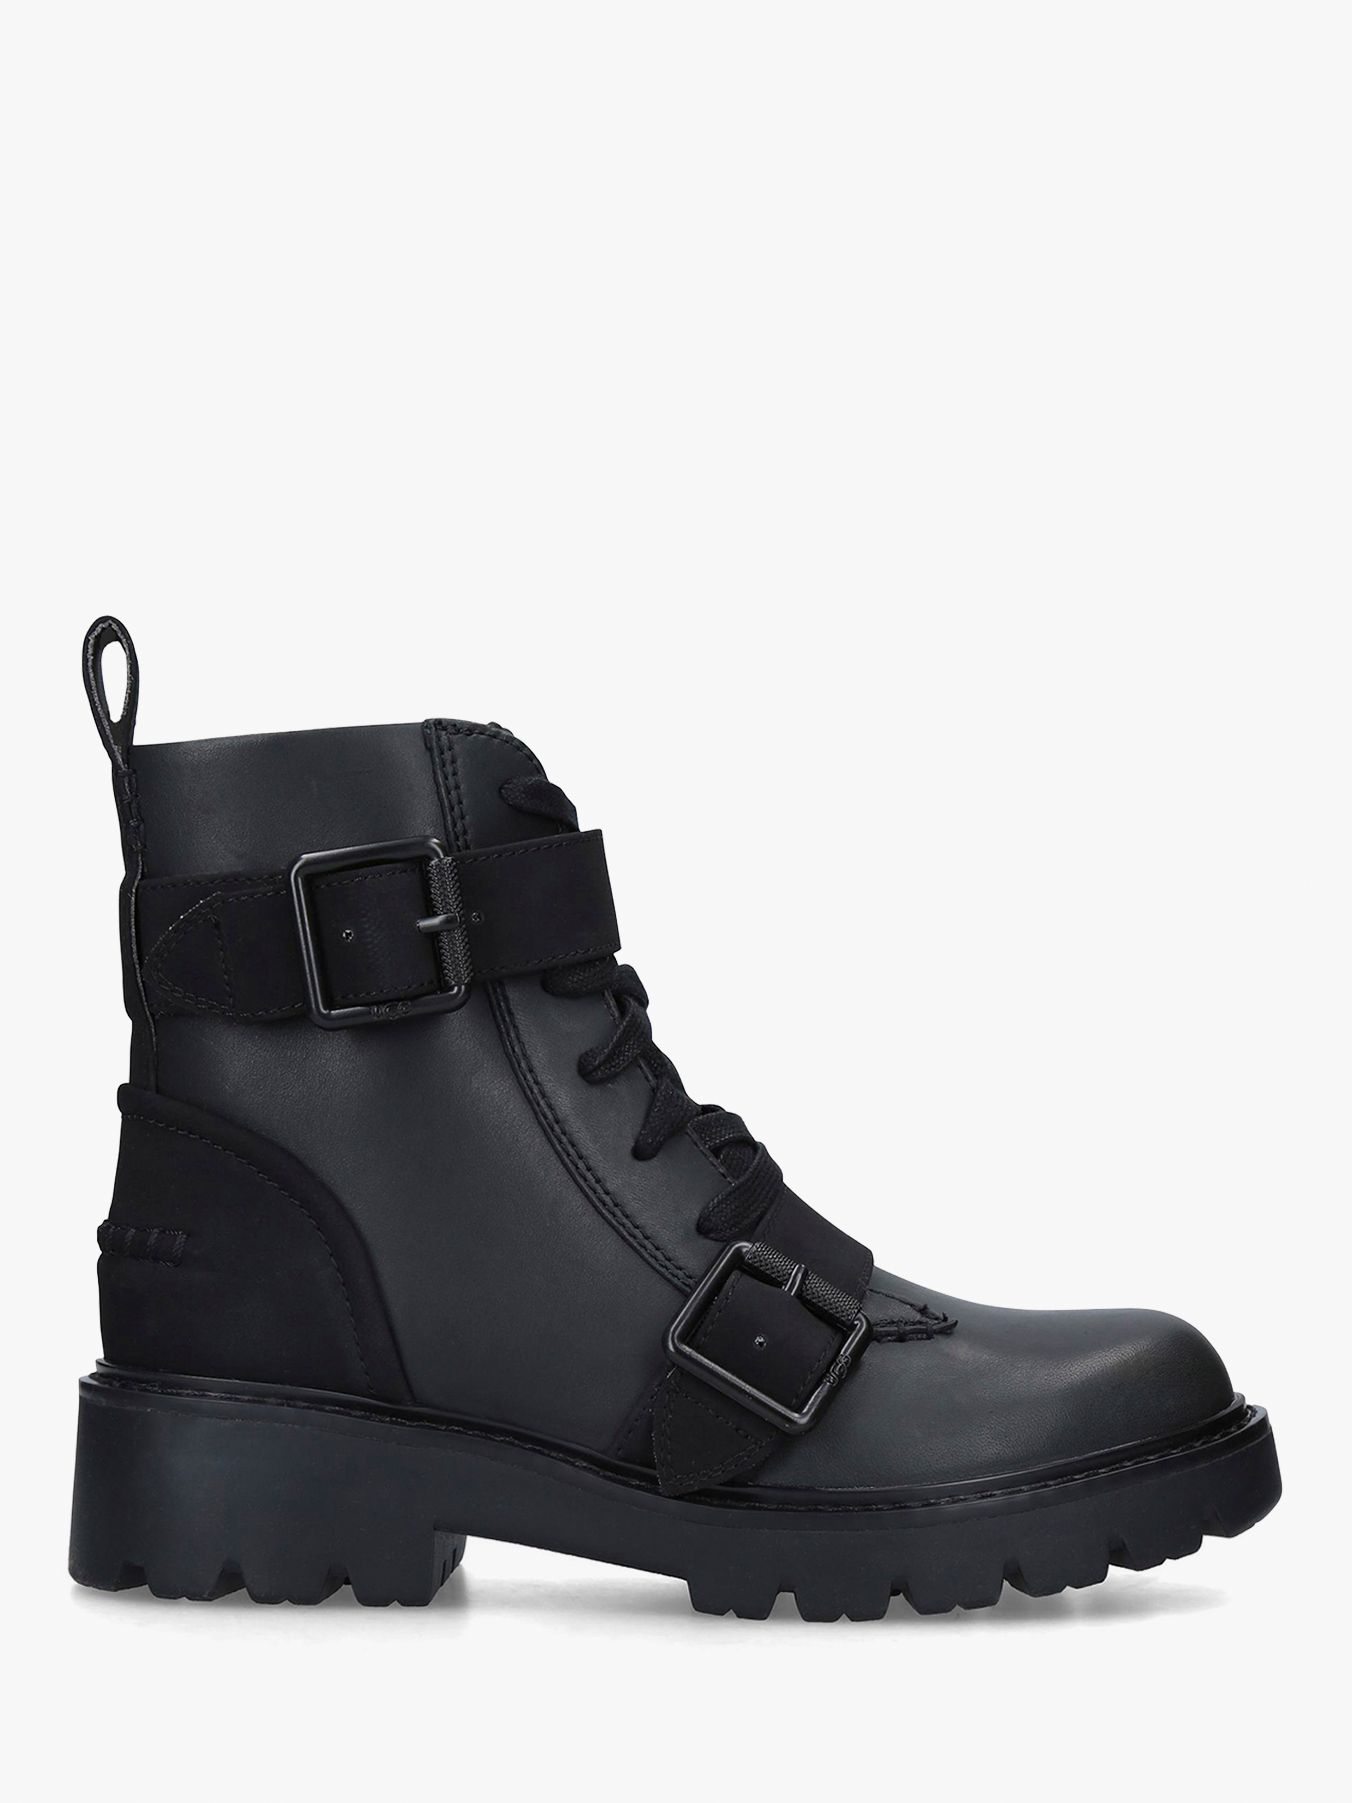 UGG Noe Leather Lace Up Boots, Black at 